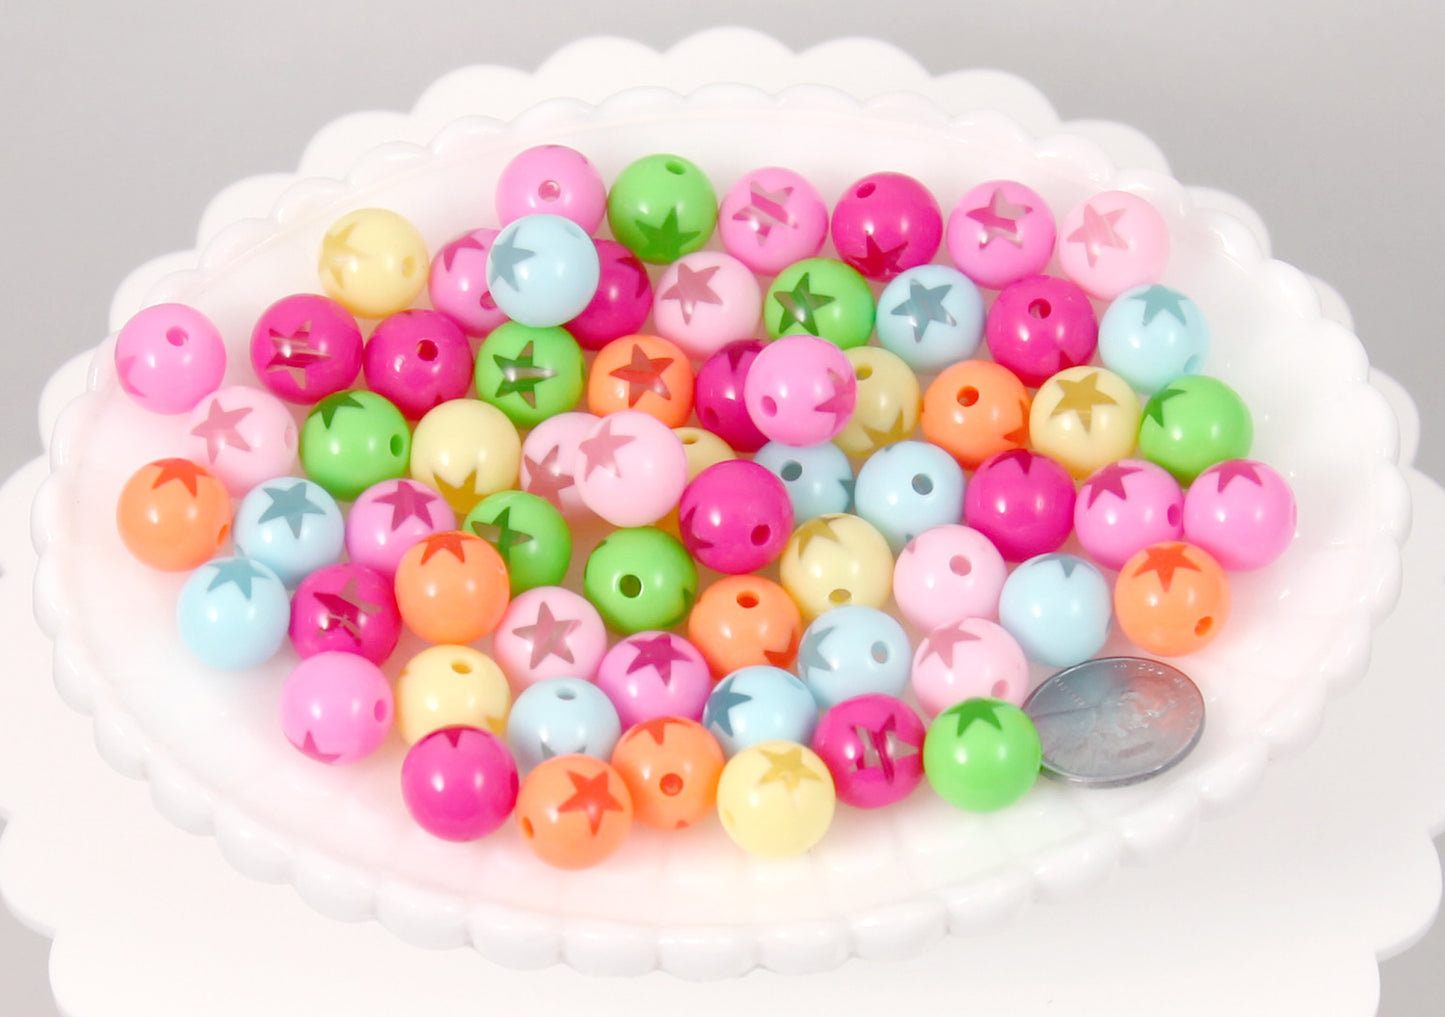 Star Beads - 12mm Amazing Bright Color Inlaid Star Bead Acrylic or Resin Beads - 45 pcs set